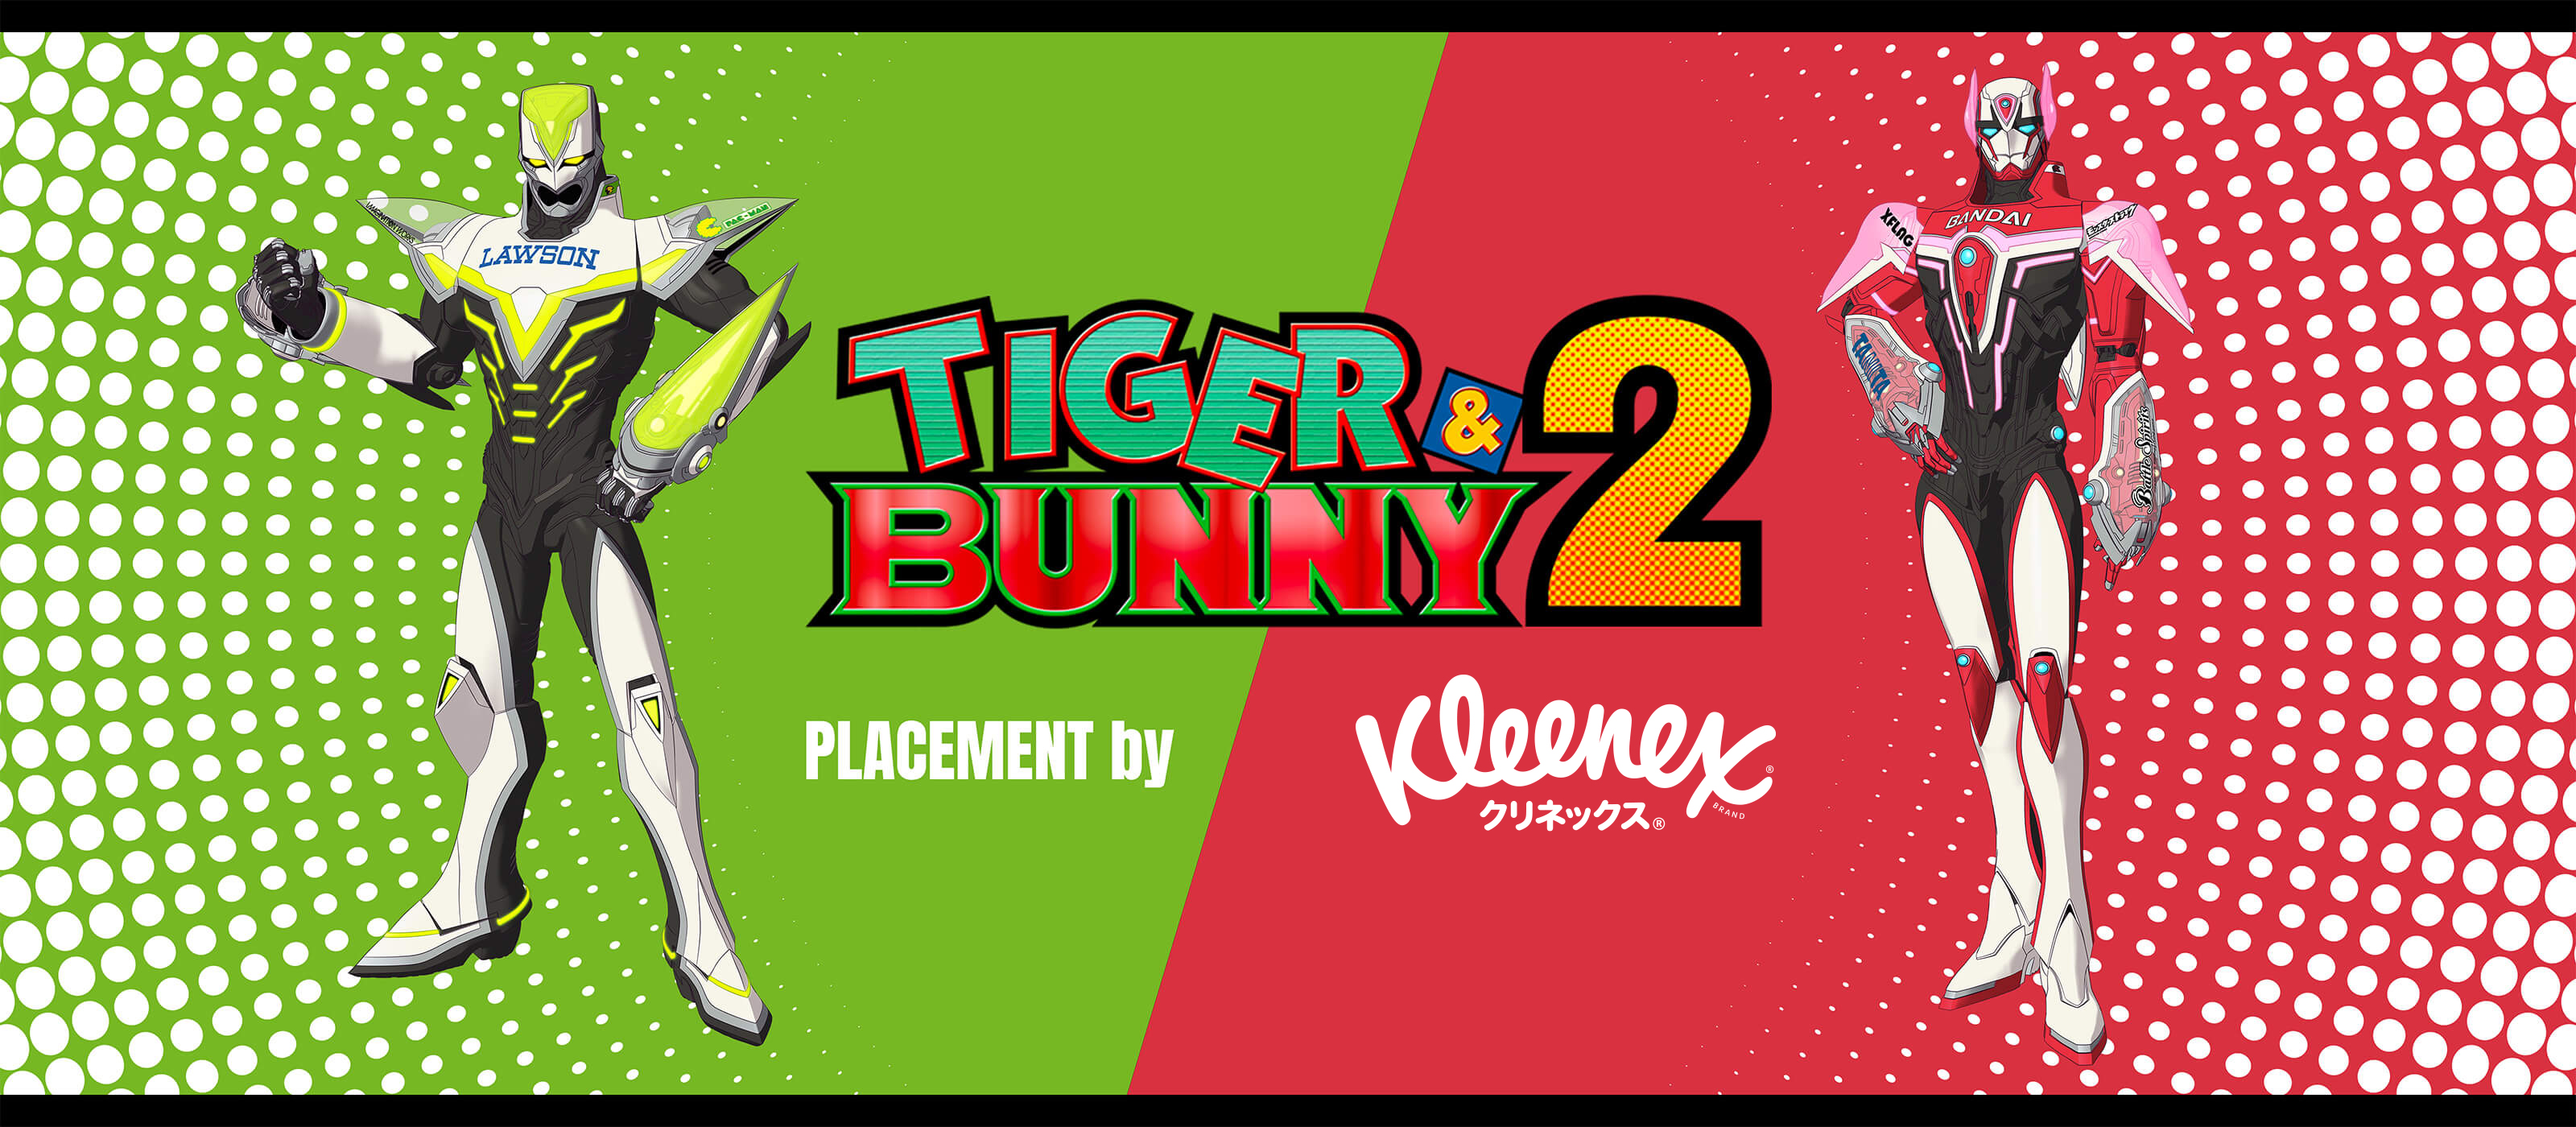 TIGER & BUNNY 2 PLACEMENT by クリネックス